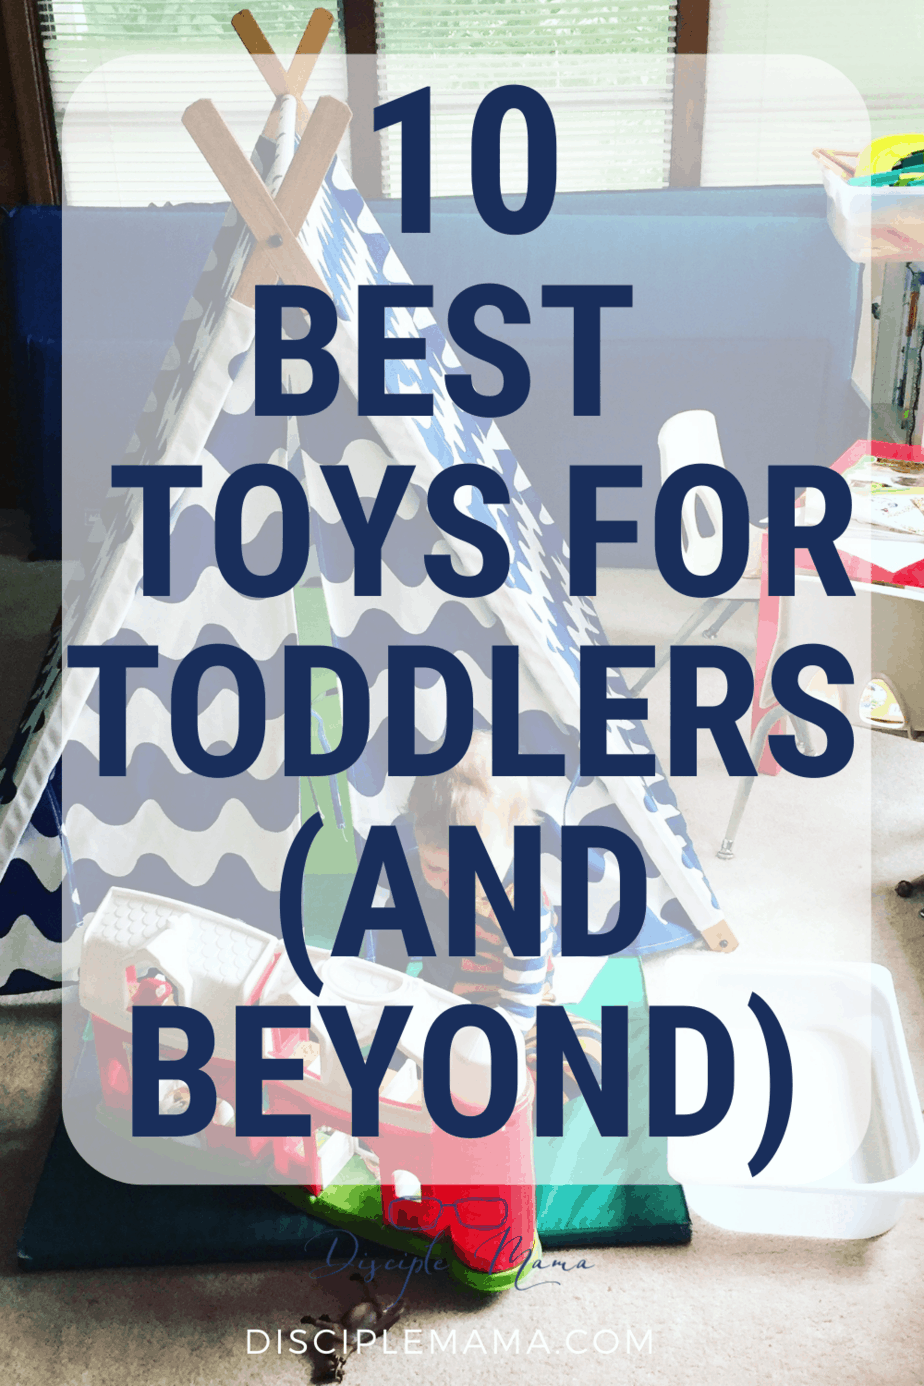 10 Best Toys for Toddlers (and Beyond)